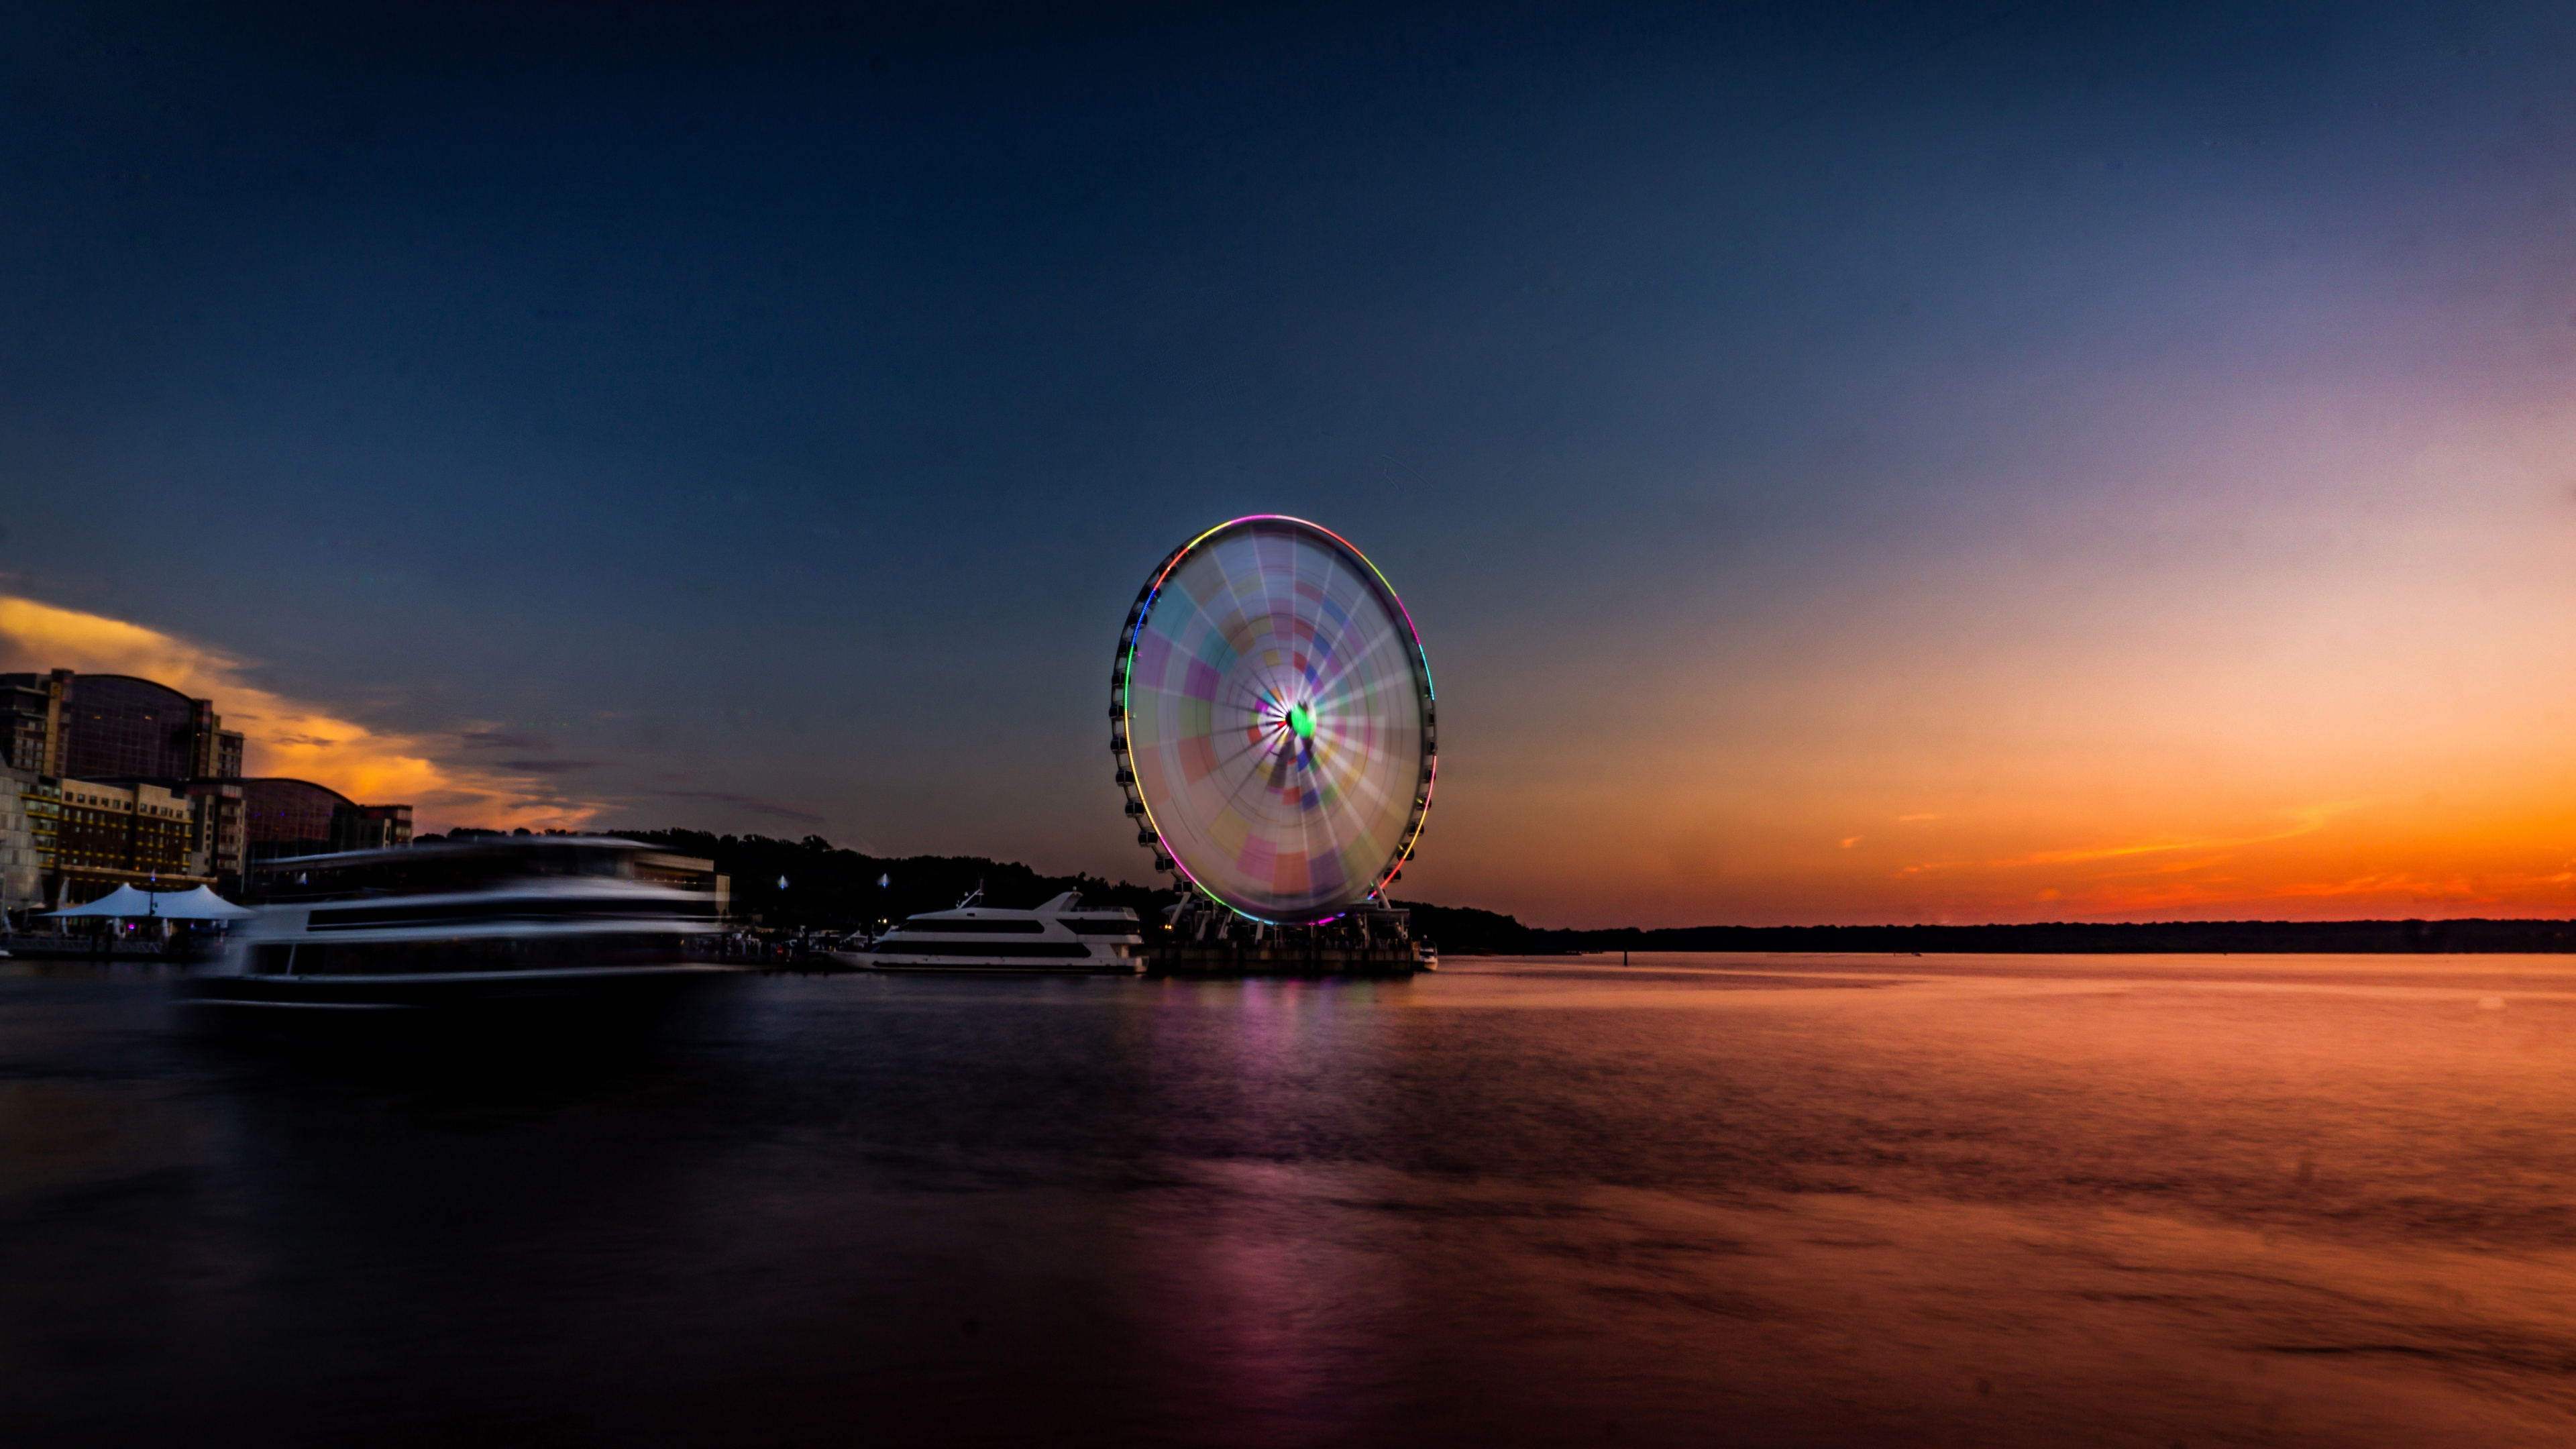 Ferris Wheel Near Body of Water During Night Time. Wallpaper in 3840x2160 Resolution